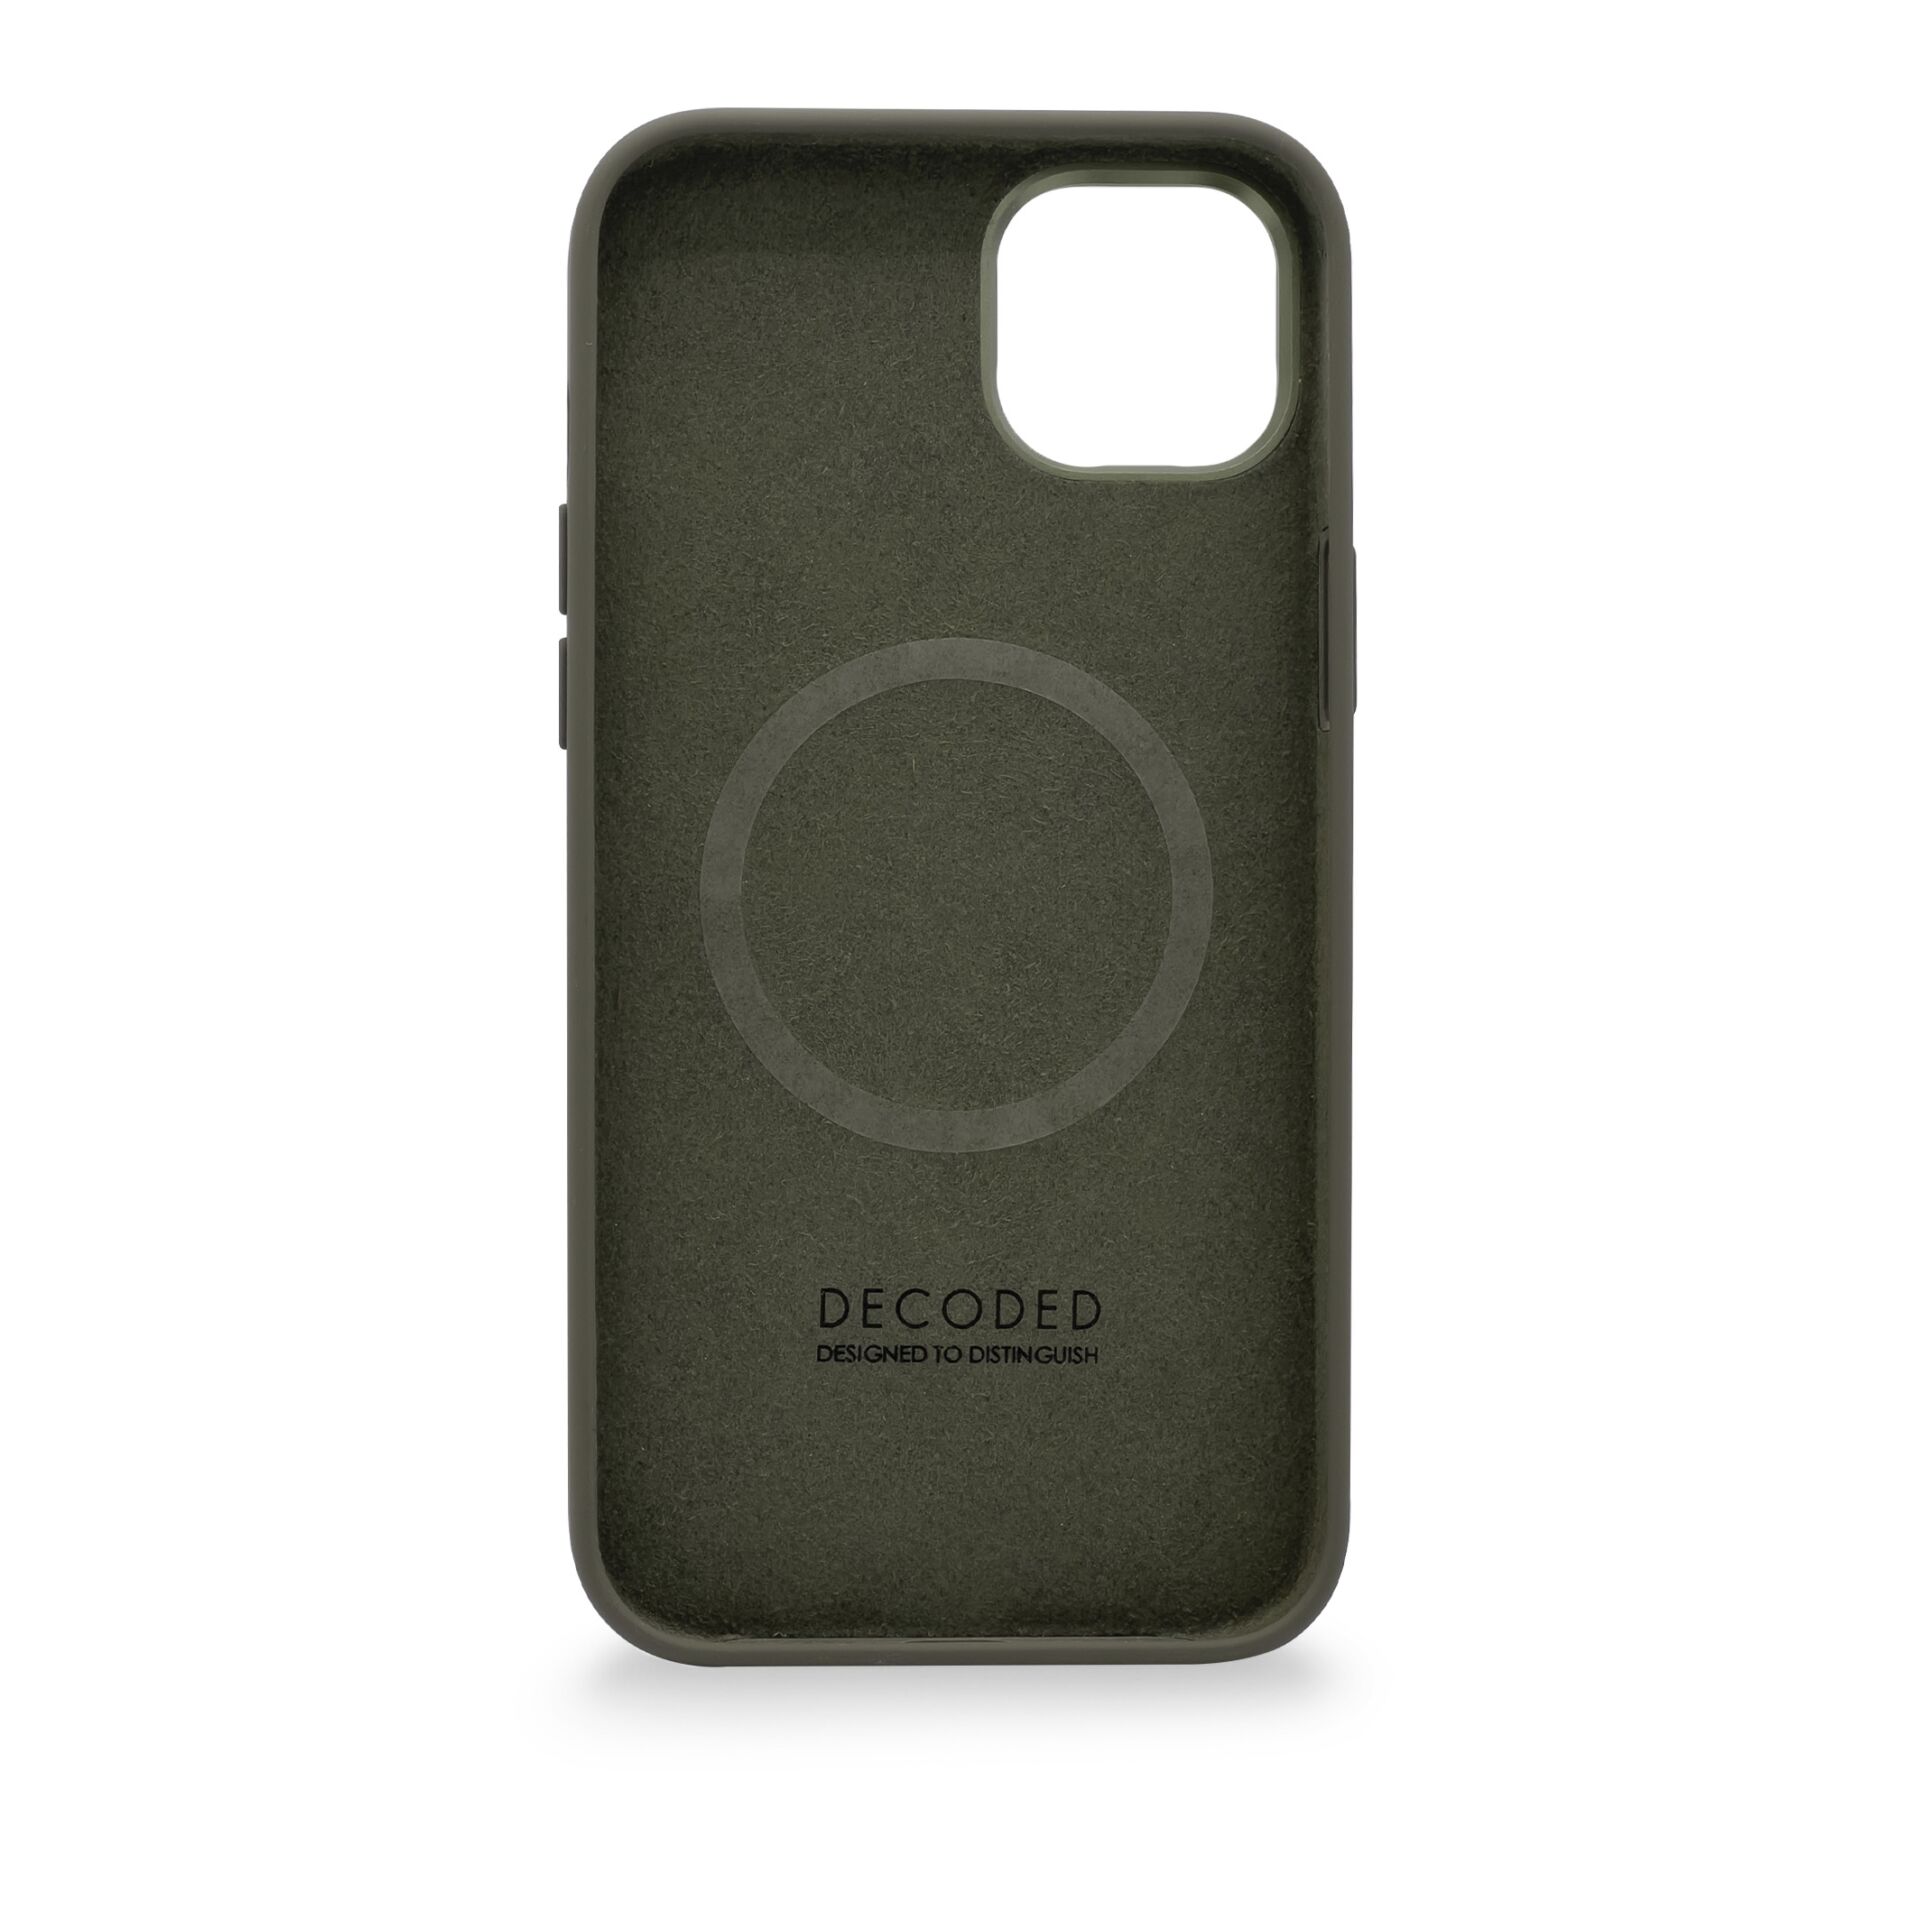 Apple, Backcover, Backcover Olive 14, DECODED Olive, AntiMicrobial iPhone Silicone